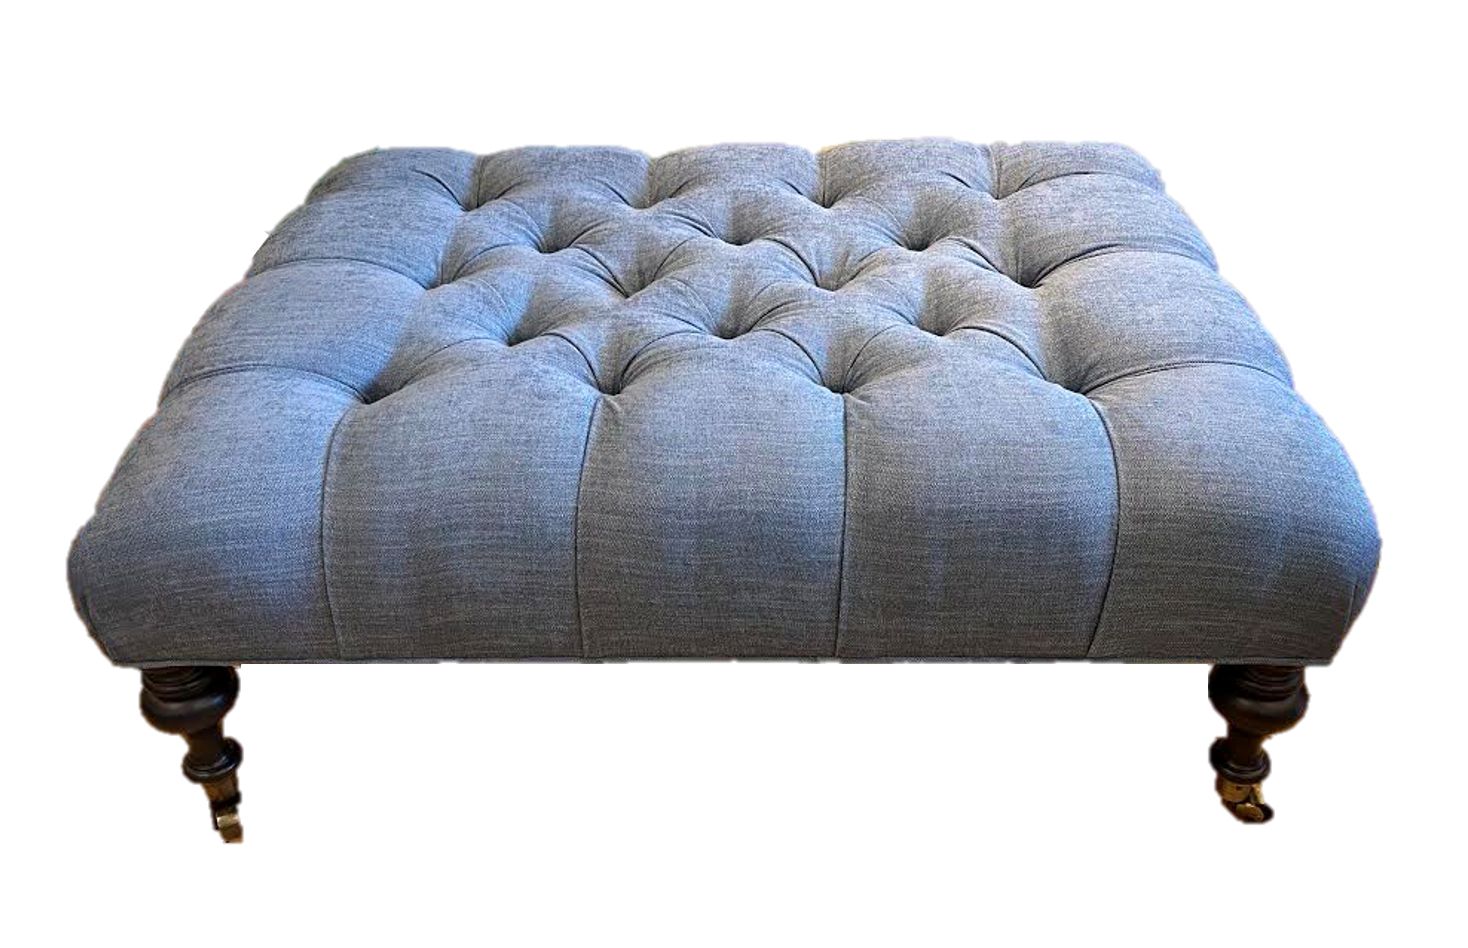 Tufted Cocktail Ottoman (View 4 of 10)